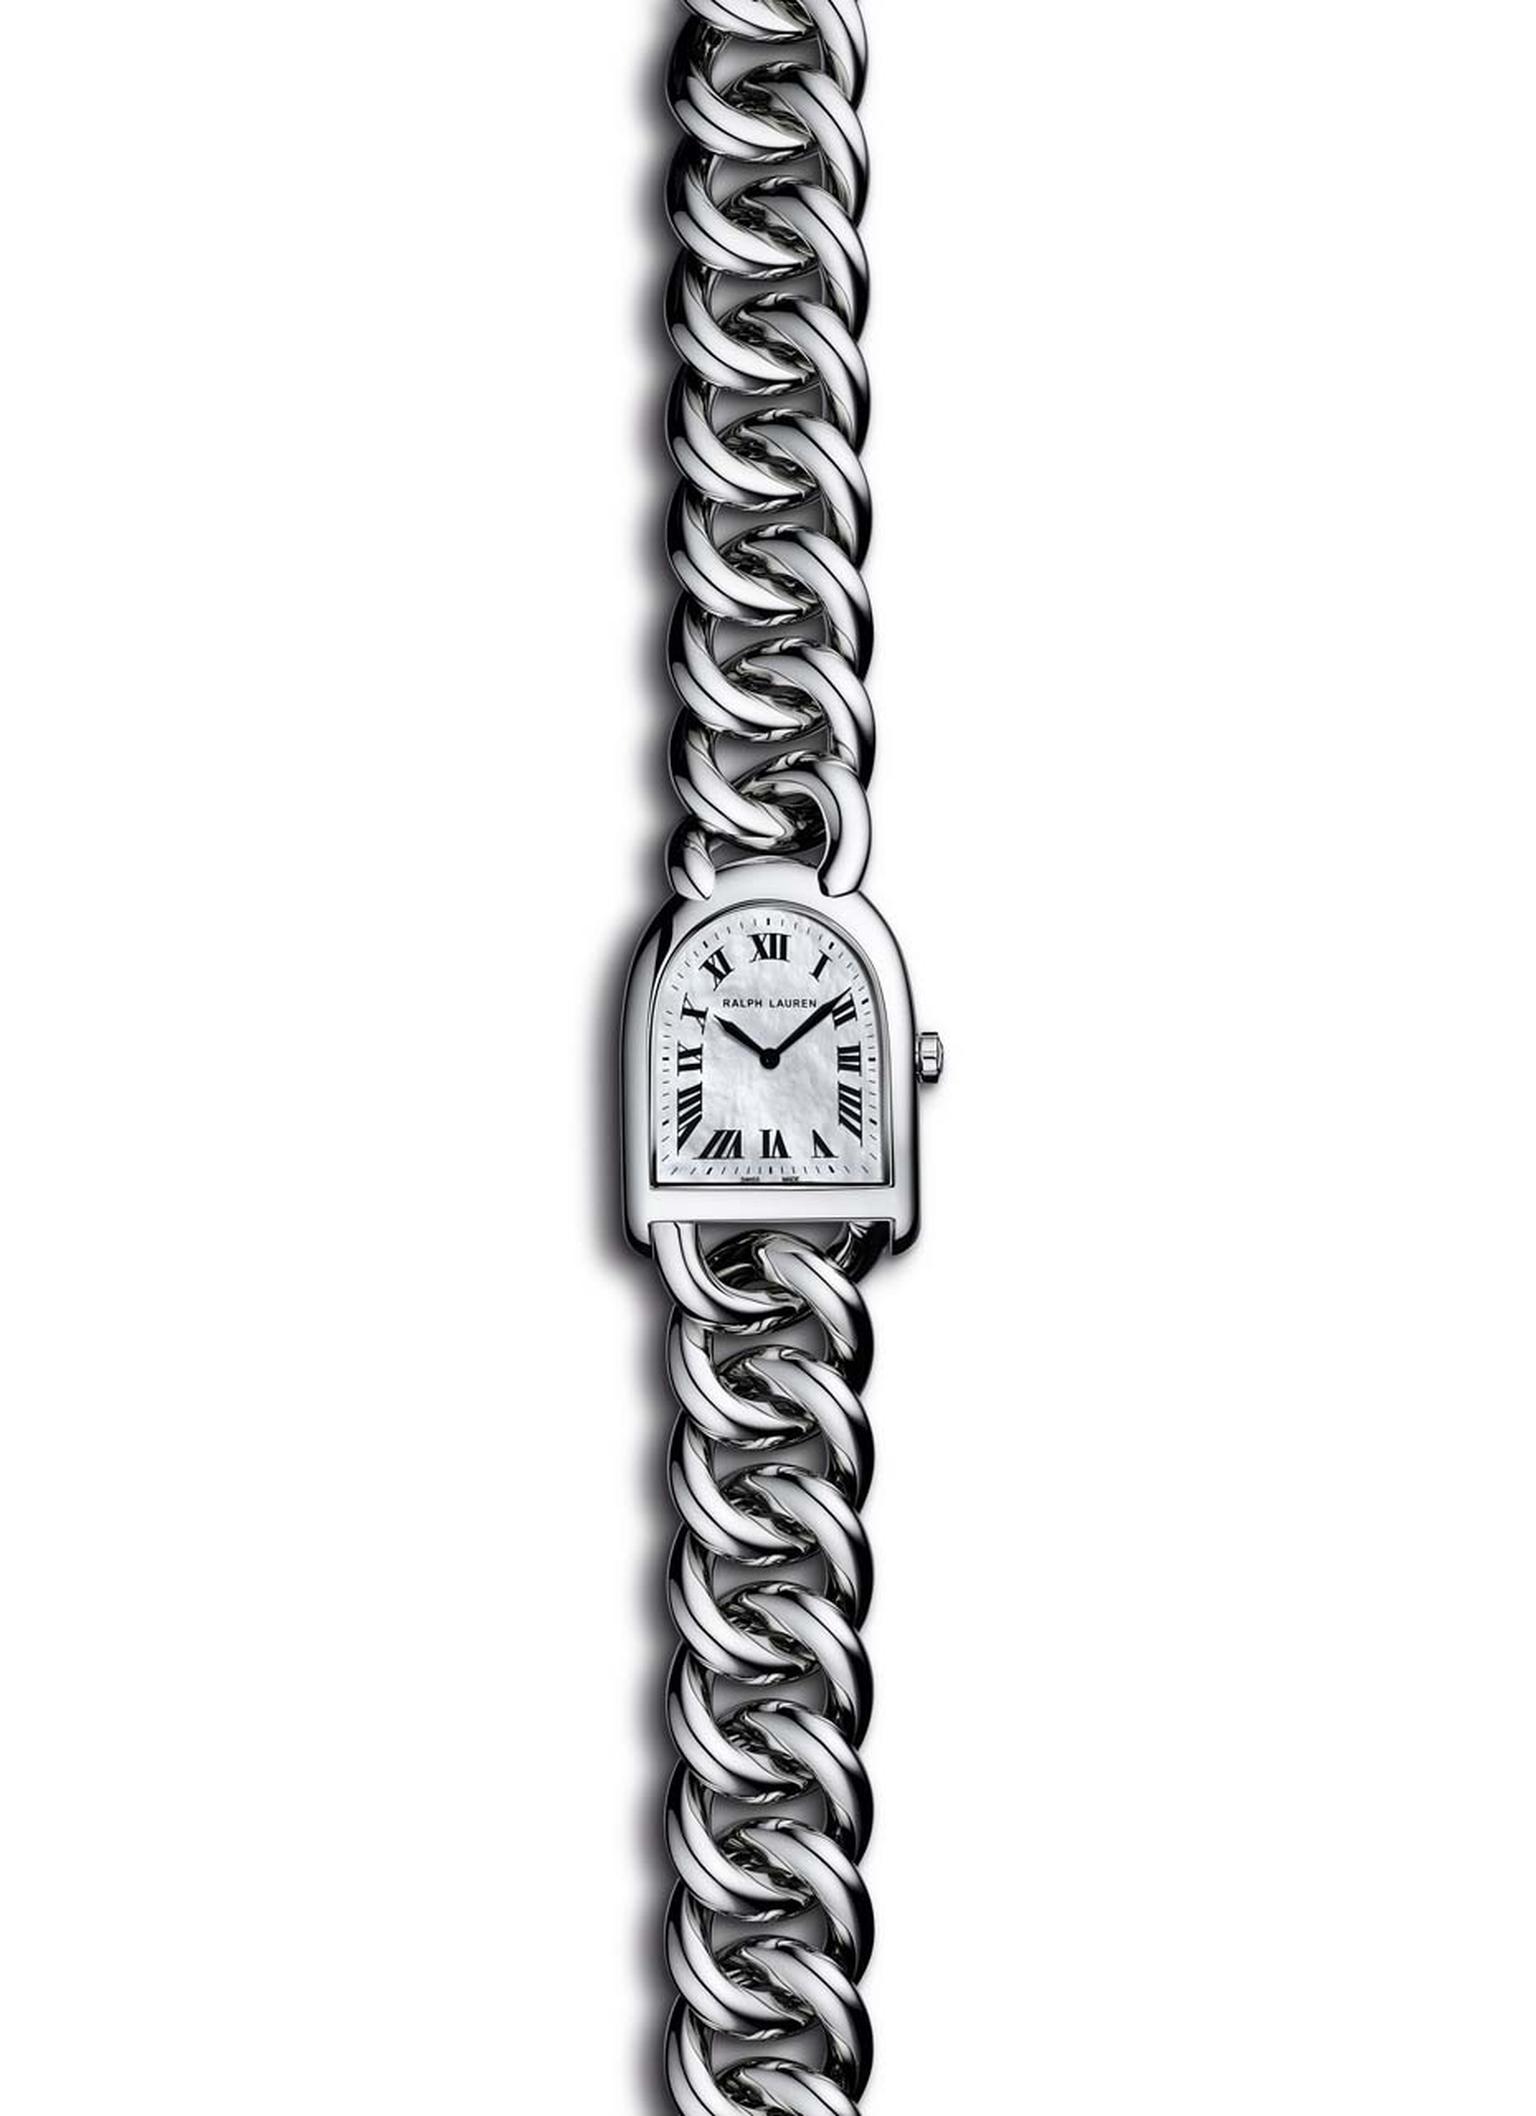 The Ralph Lauren Petite-Link watch, from the Stirrup collection, is a perfect blend of practicality and femininity thanks to its stainless steel case and mother-of-pearl dial.